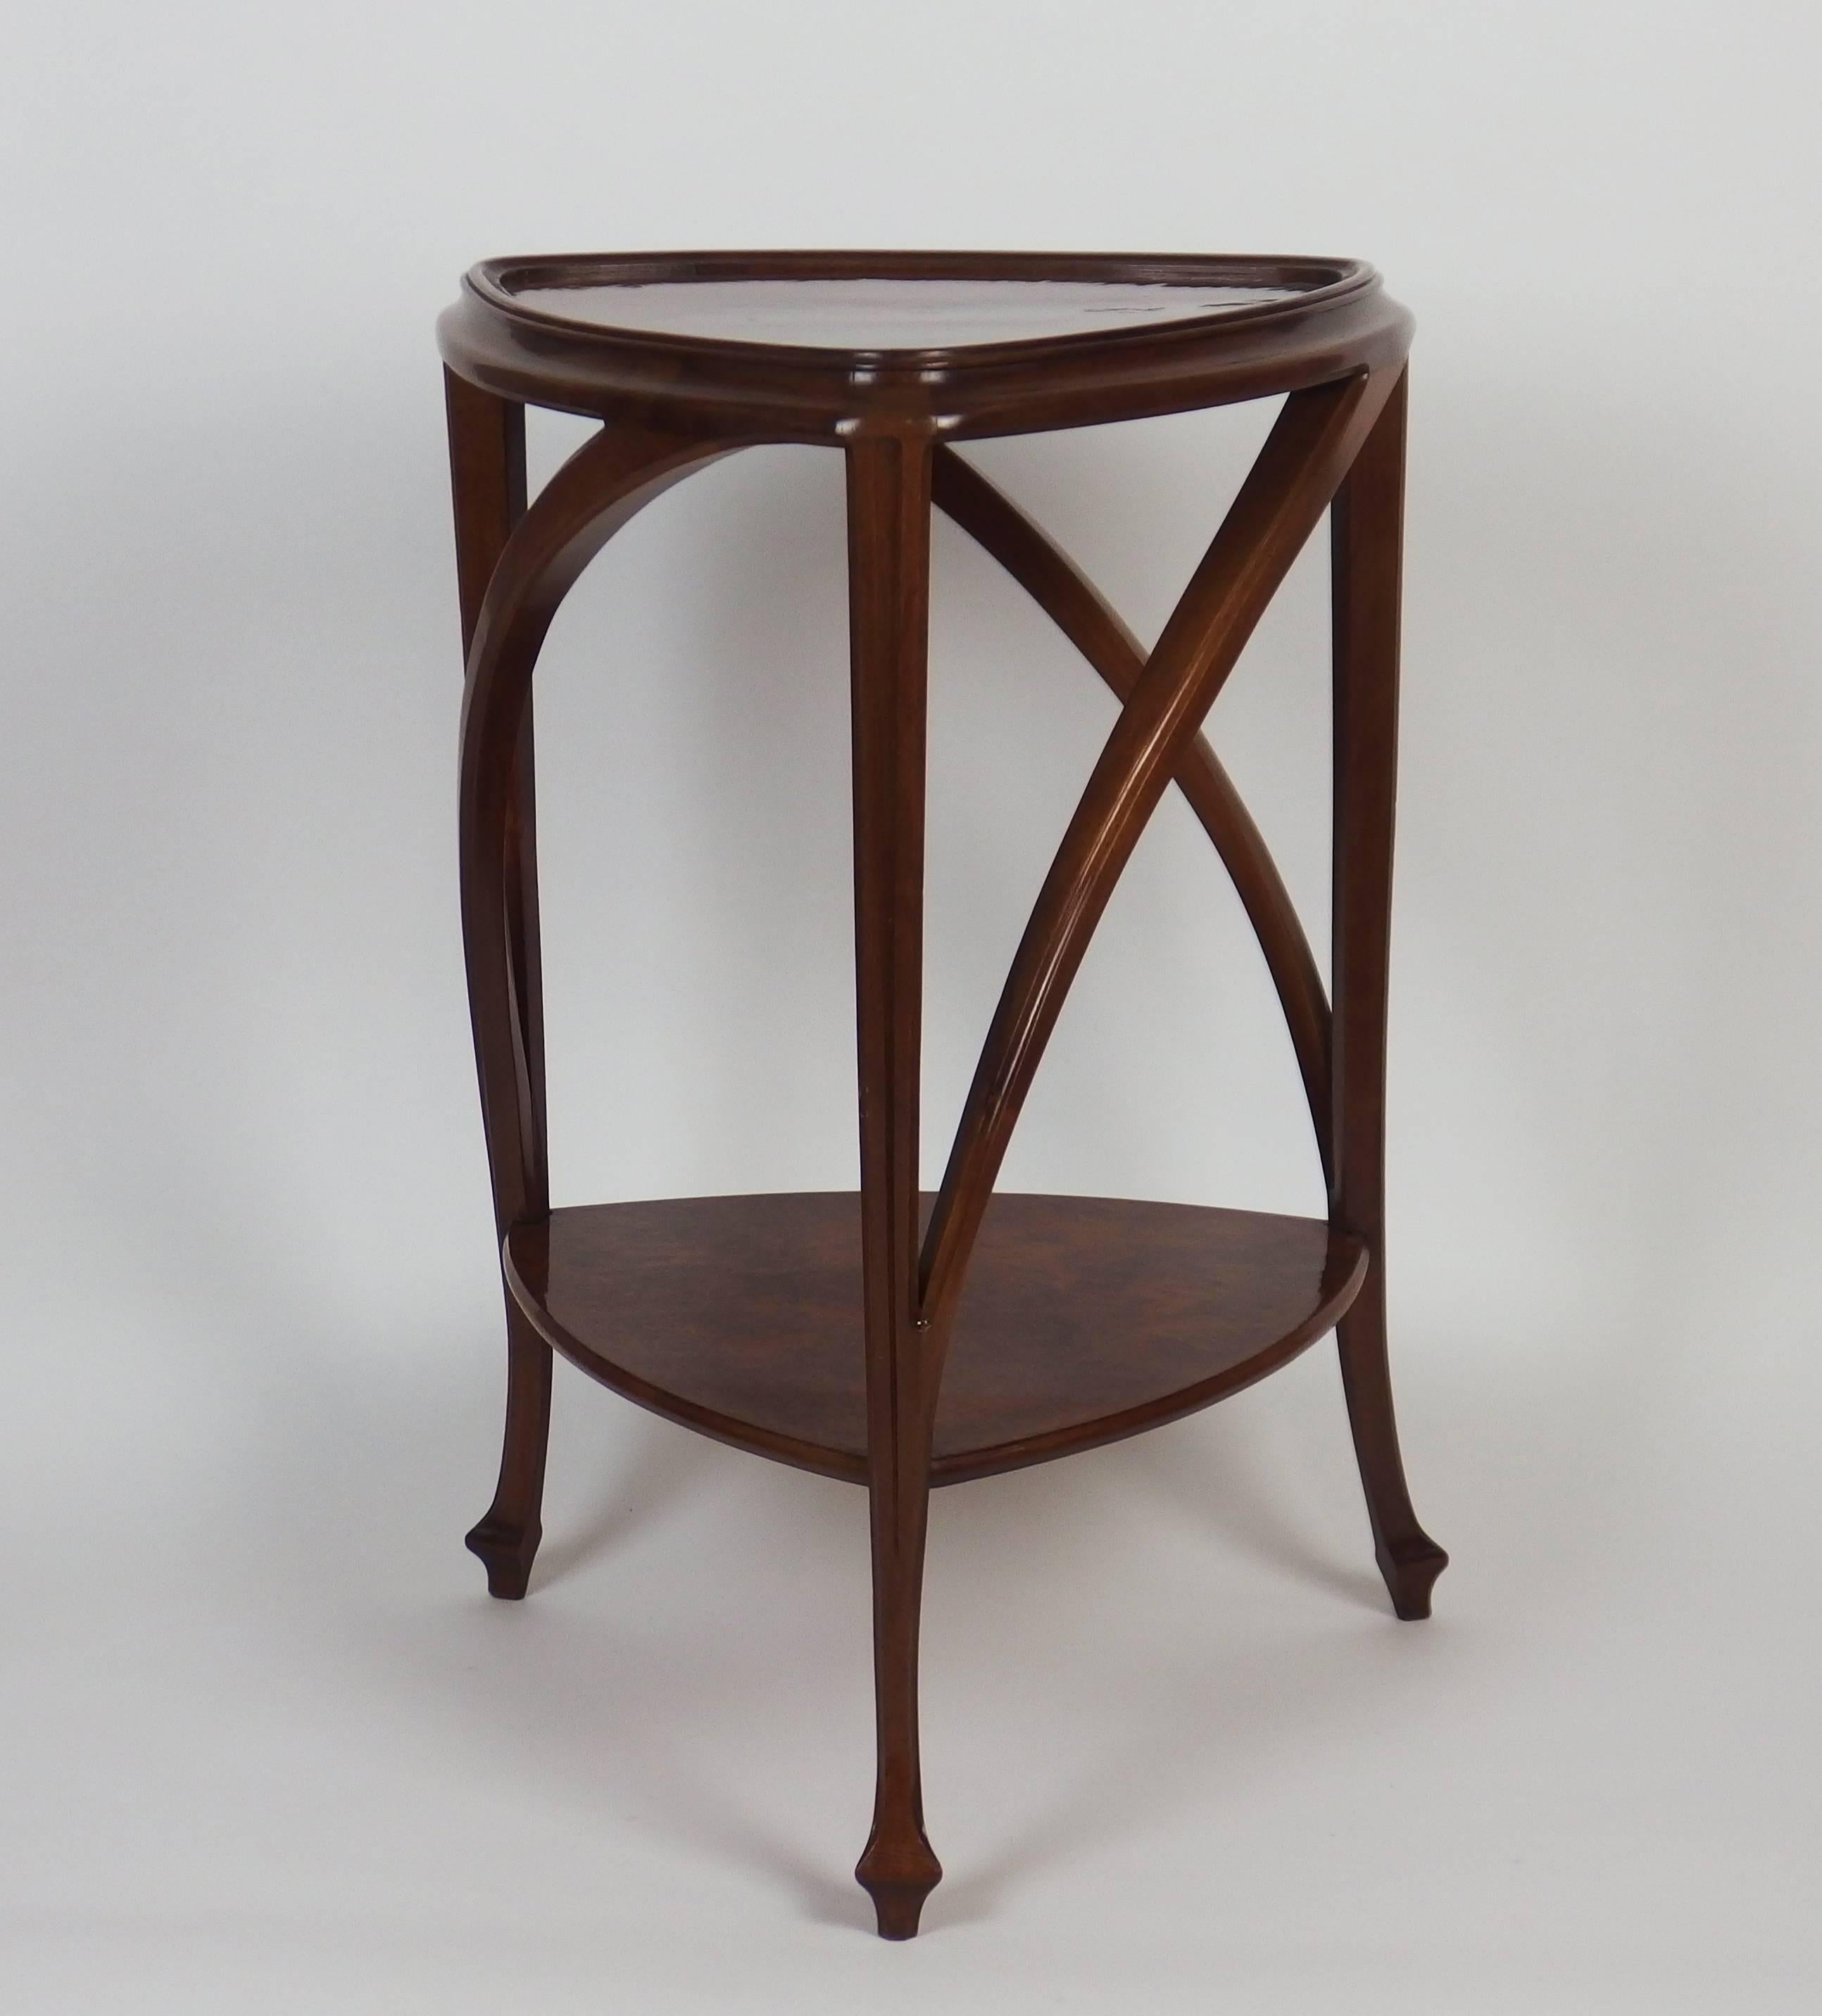 A triangular burr walnut top on mahogany moulded buttressed supports and legs joined by a similar platform stretcher. Designed by Louis Majorelle, circa 1910.